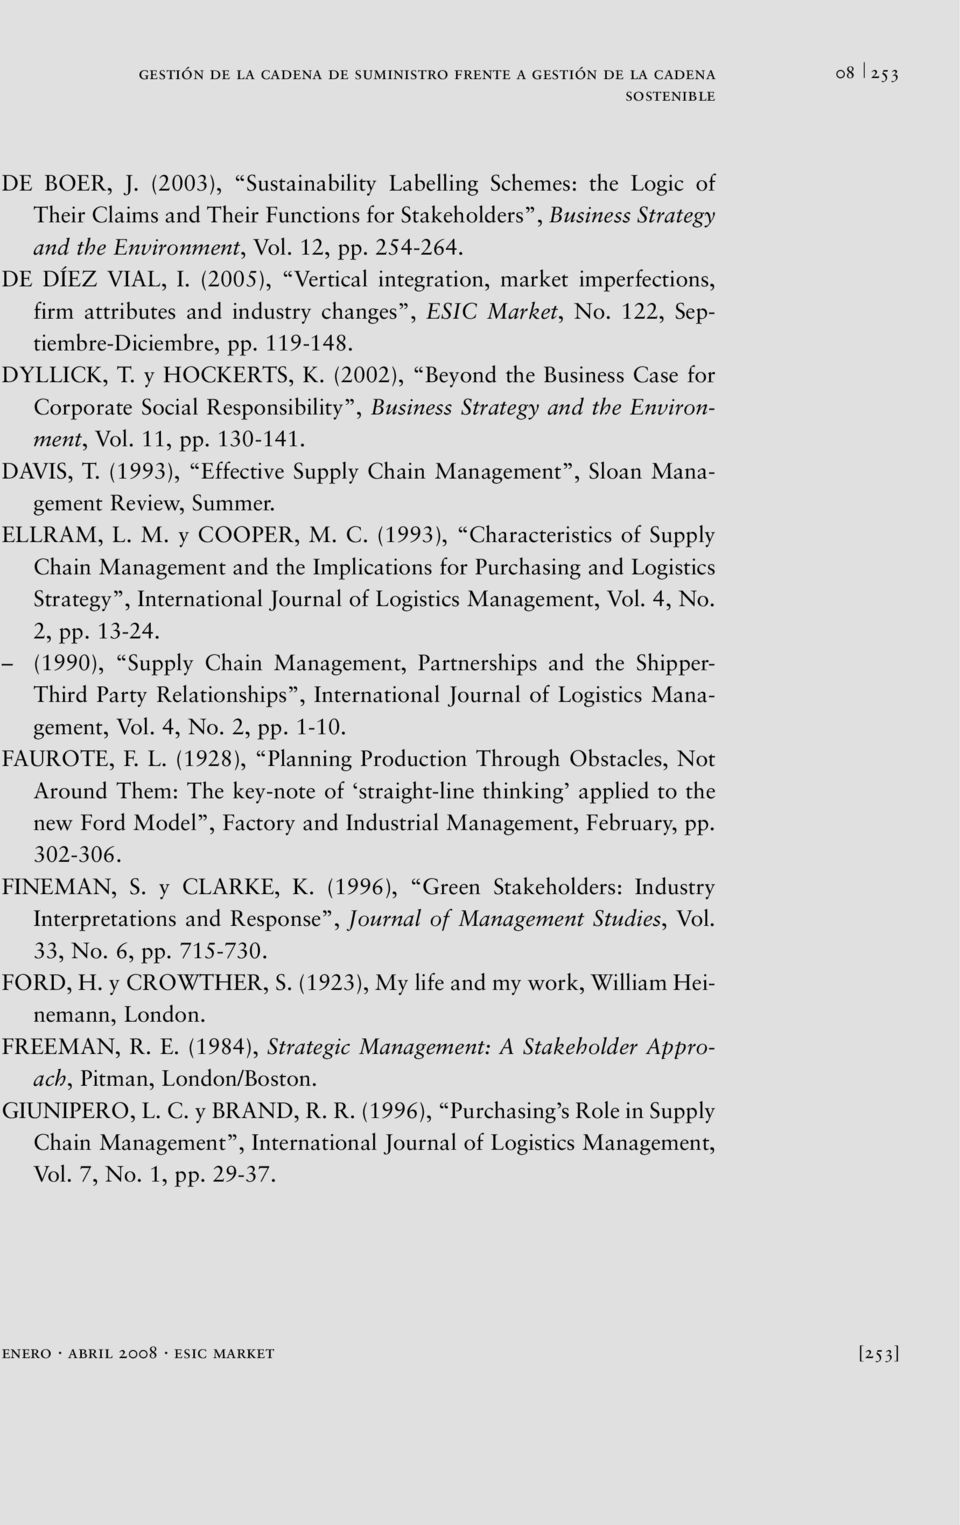 (2005), Vertical integration, market imperfections, firm attributes and industry changes, ESIC Market, No. 122, Septiembre-Diciembre, pp. 119-148. DYLLICK, T. y HOCKERTS, K.